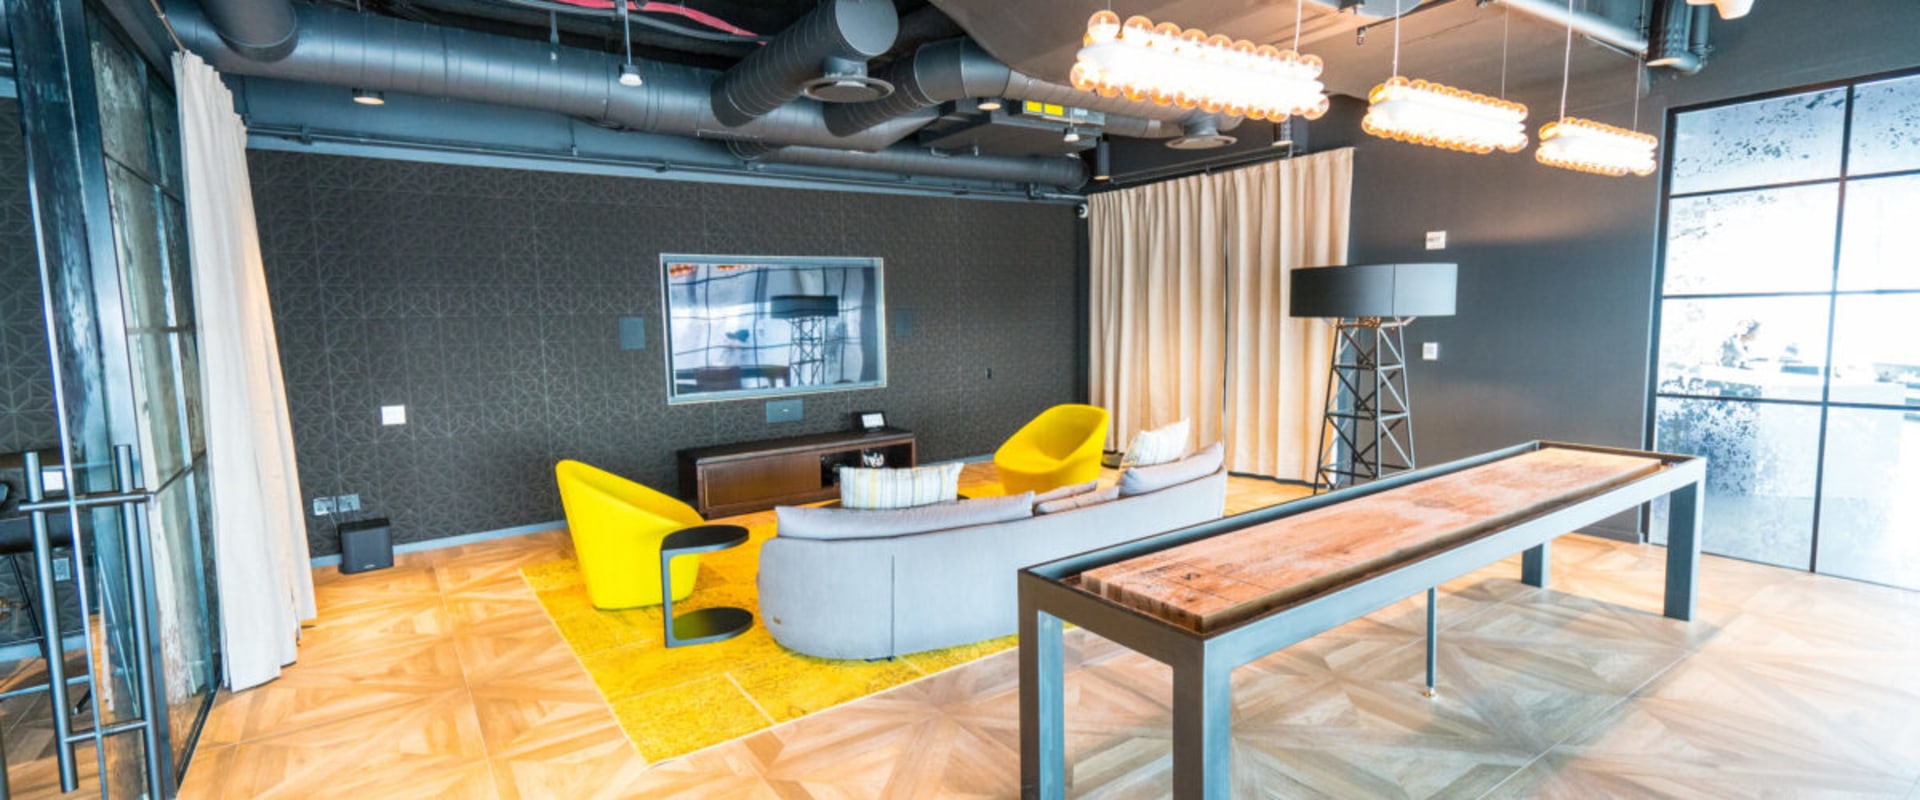 What Amenities are Included in an Individual Workspace in a Co-Working Office Space?